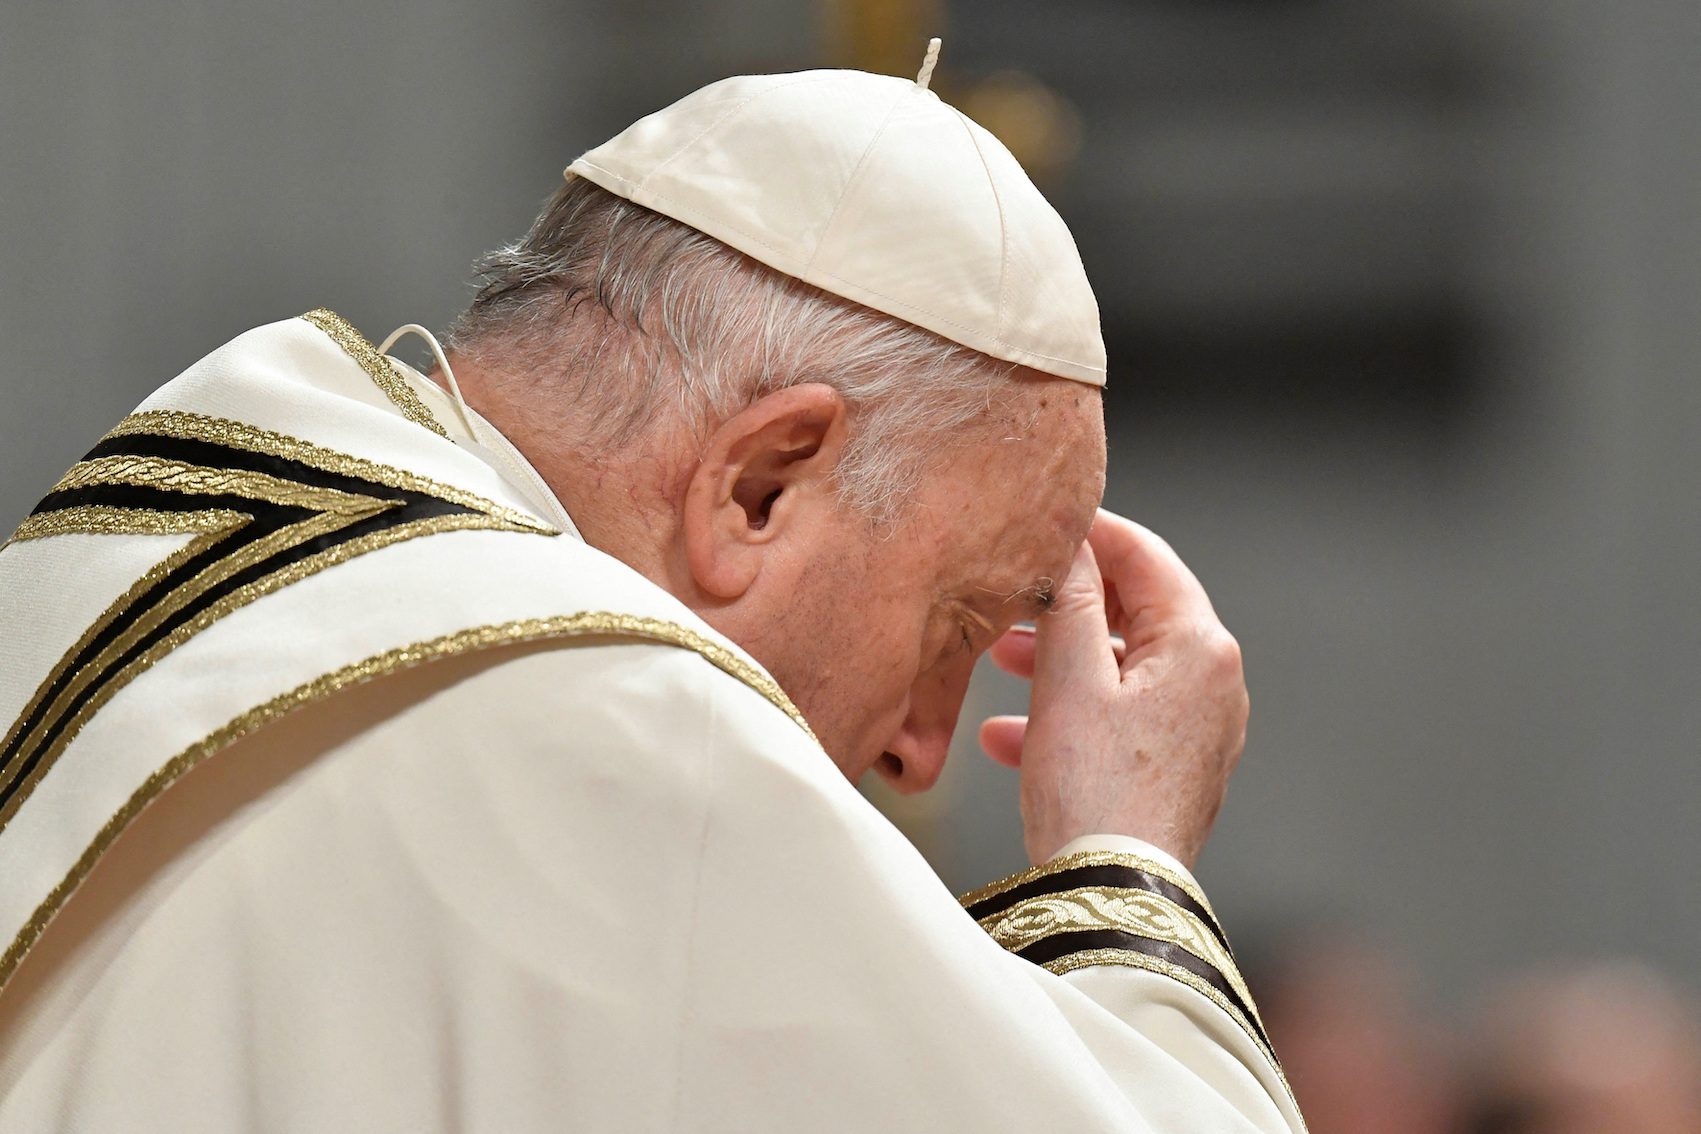 On Christmas eve, Pope Francis laments ‘futile’ war in Holy Land